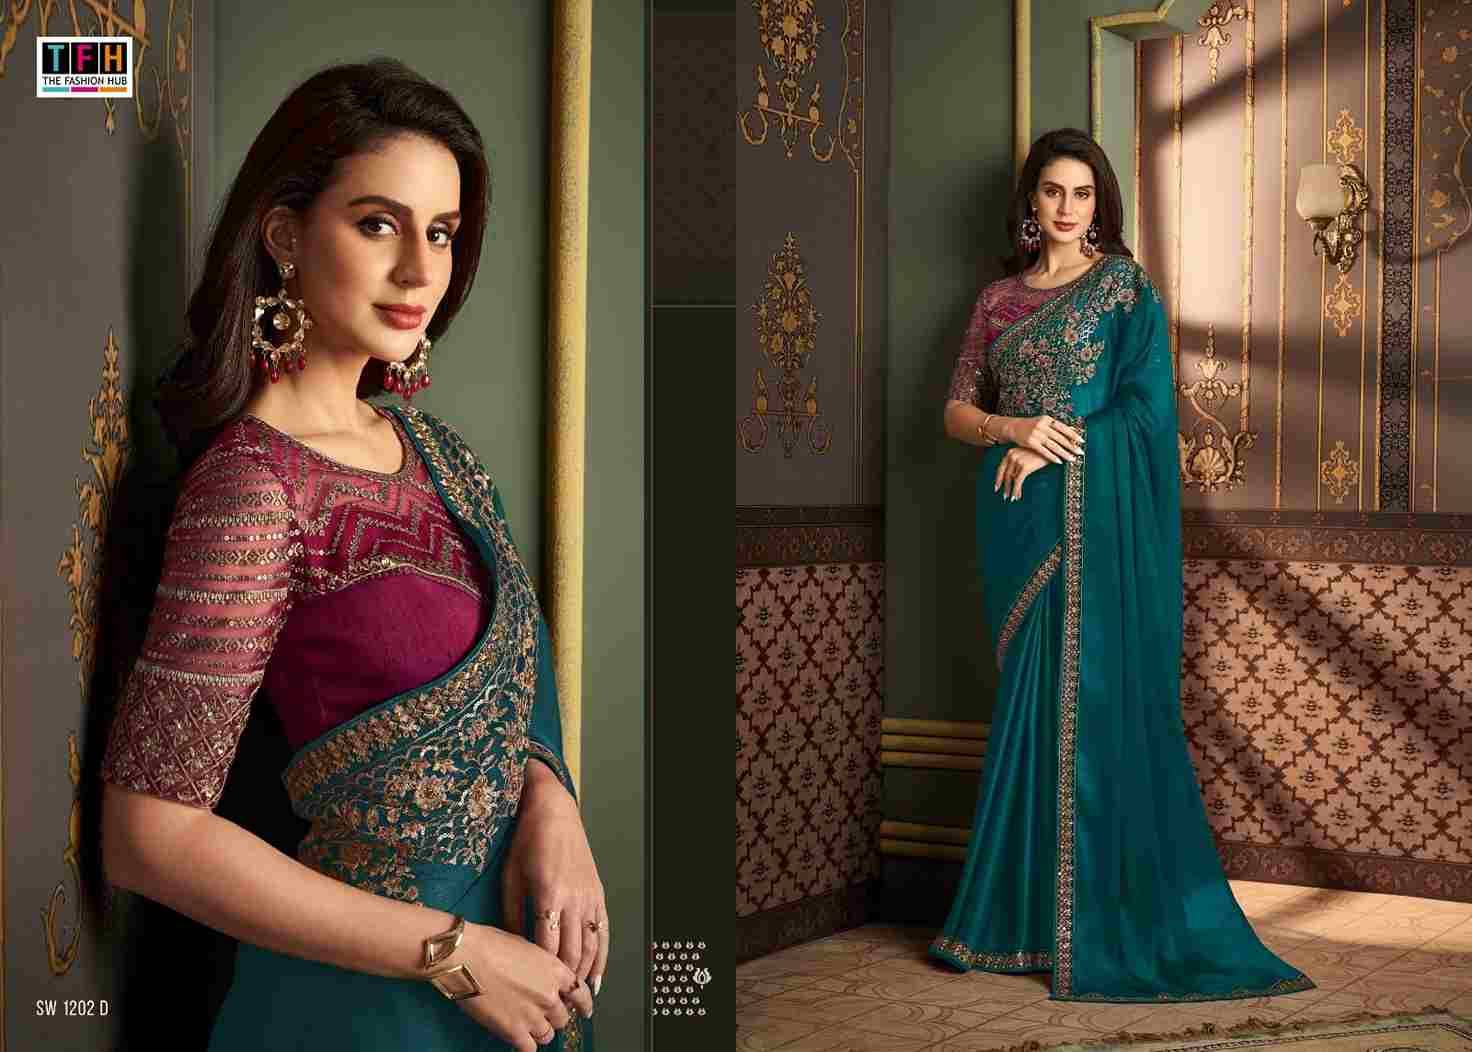 Sandalwood 1202 Colours By TFH 1202-A To 1202-F Series Indian Traditional Wear Collection Beautiful Stylish Fancy Colorful Party Wear & Occasional Wear Silk Sarees At Wholesale Price